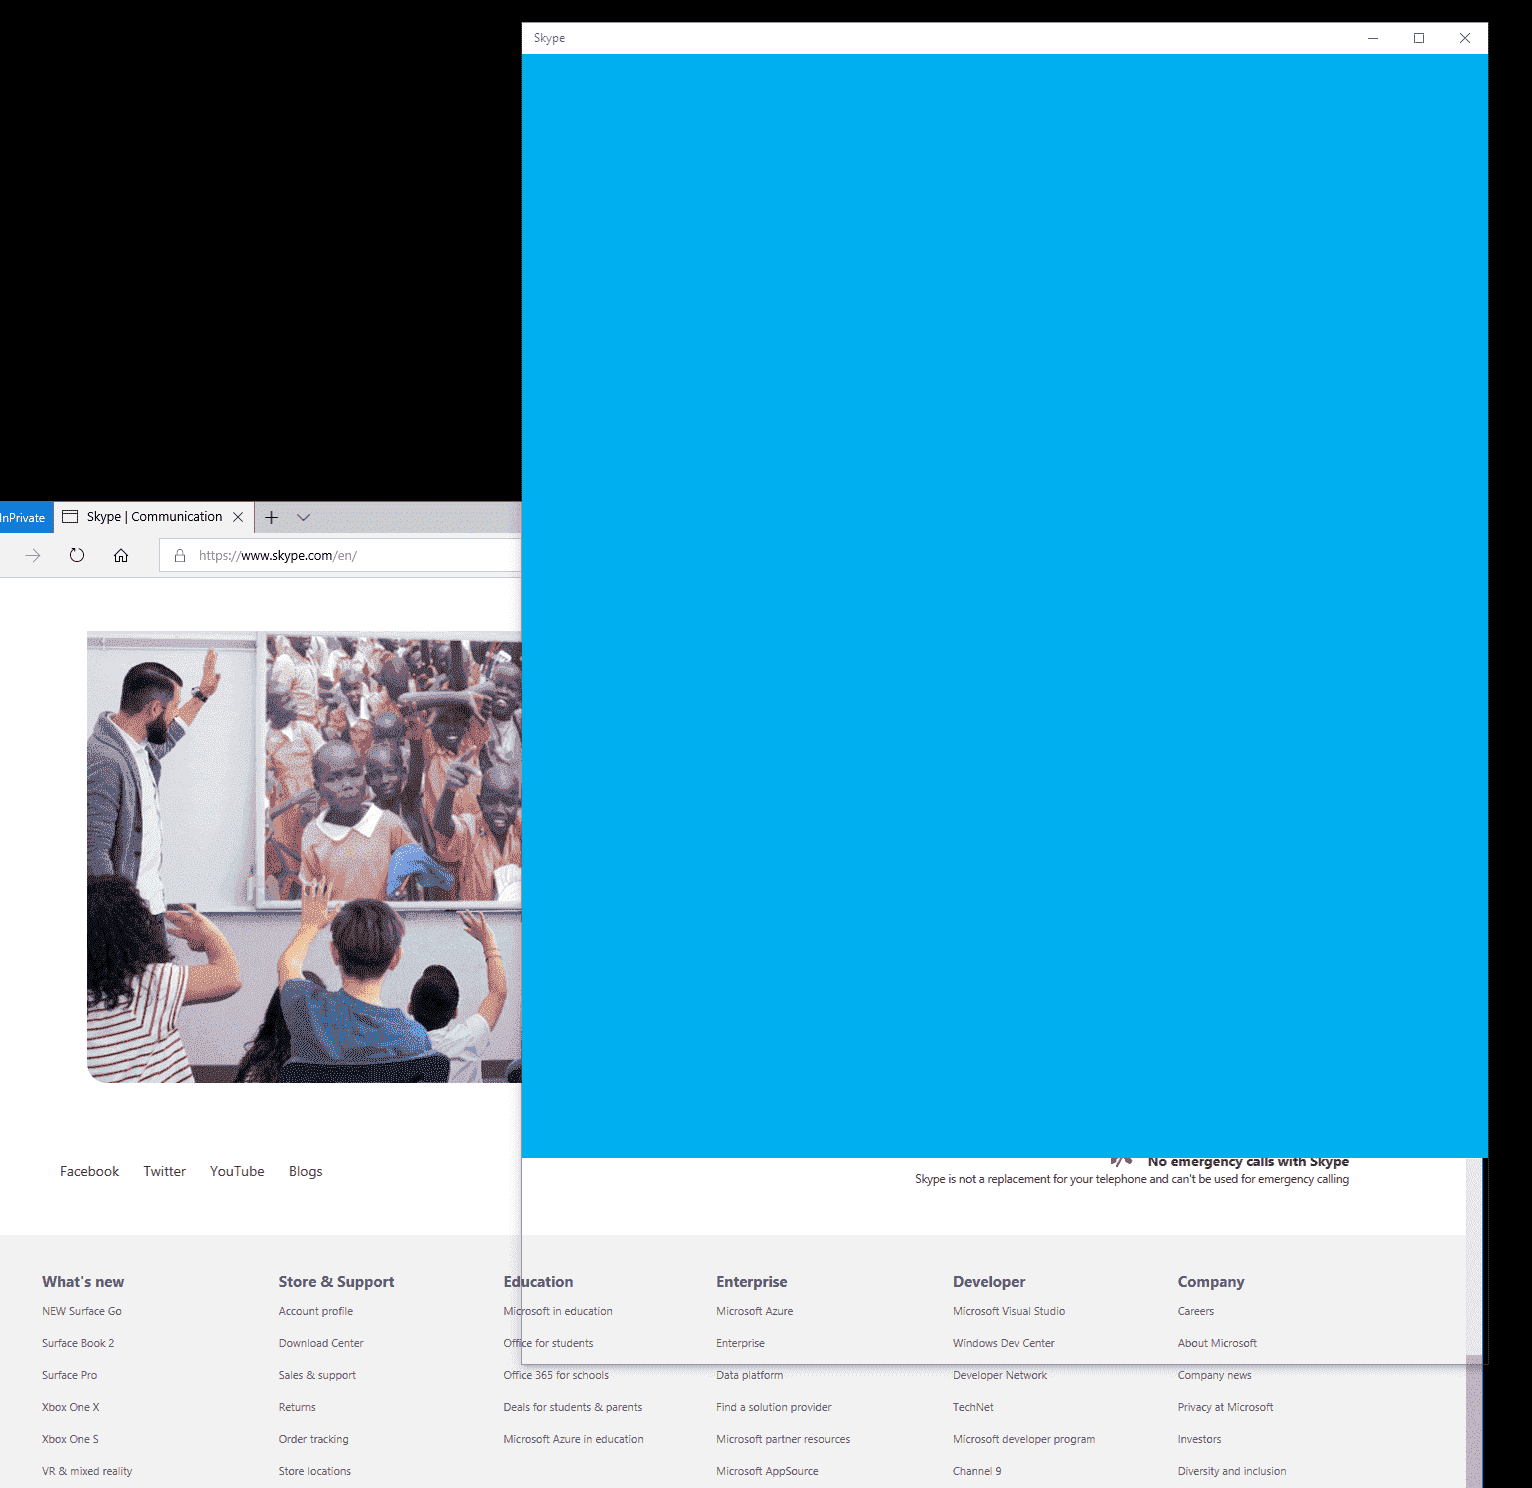 Windows 10 still has bug with resizing 6f5eee16-2731-45f4-a005-be33d8618b1c?upload=true.png